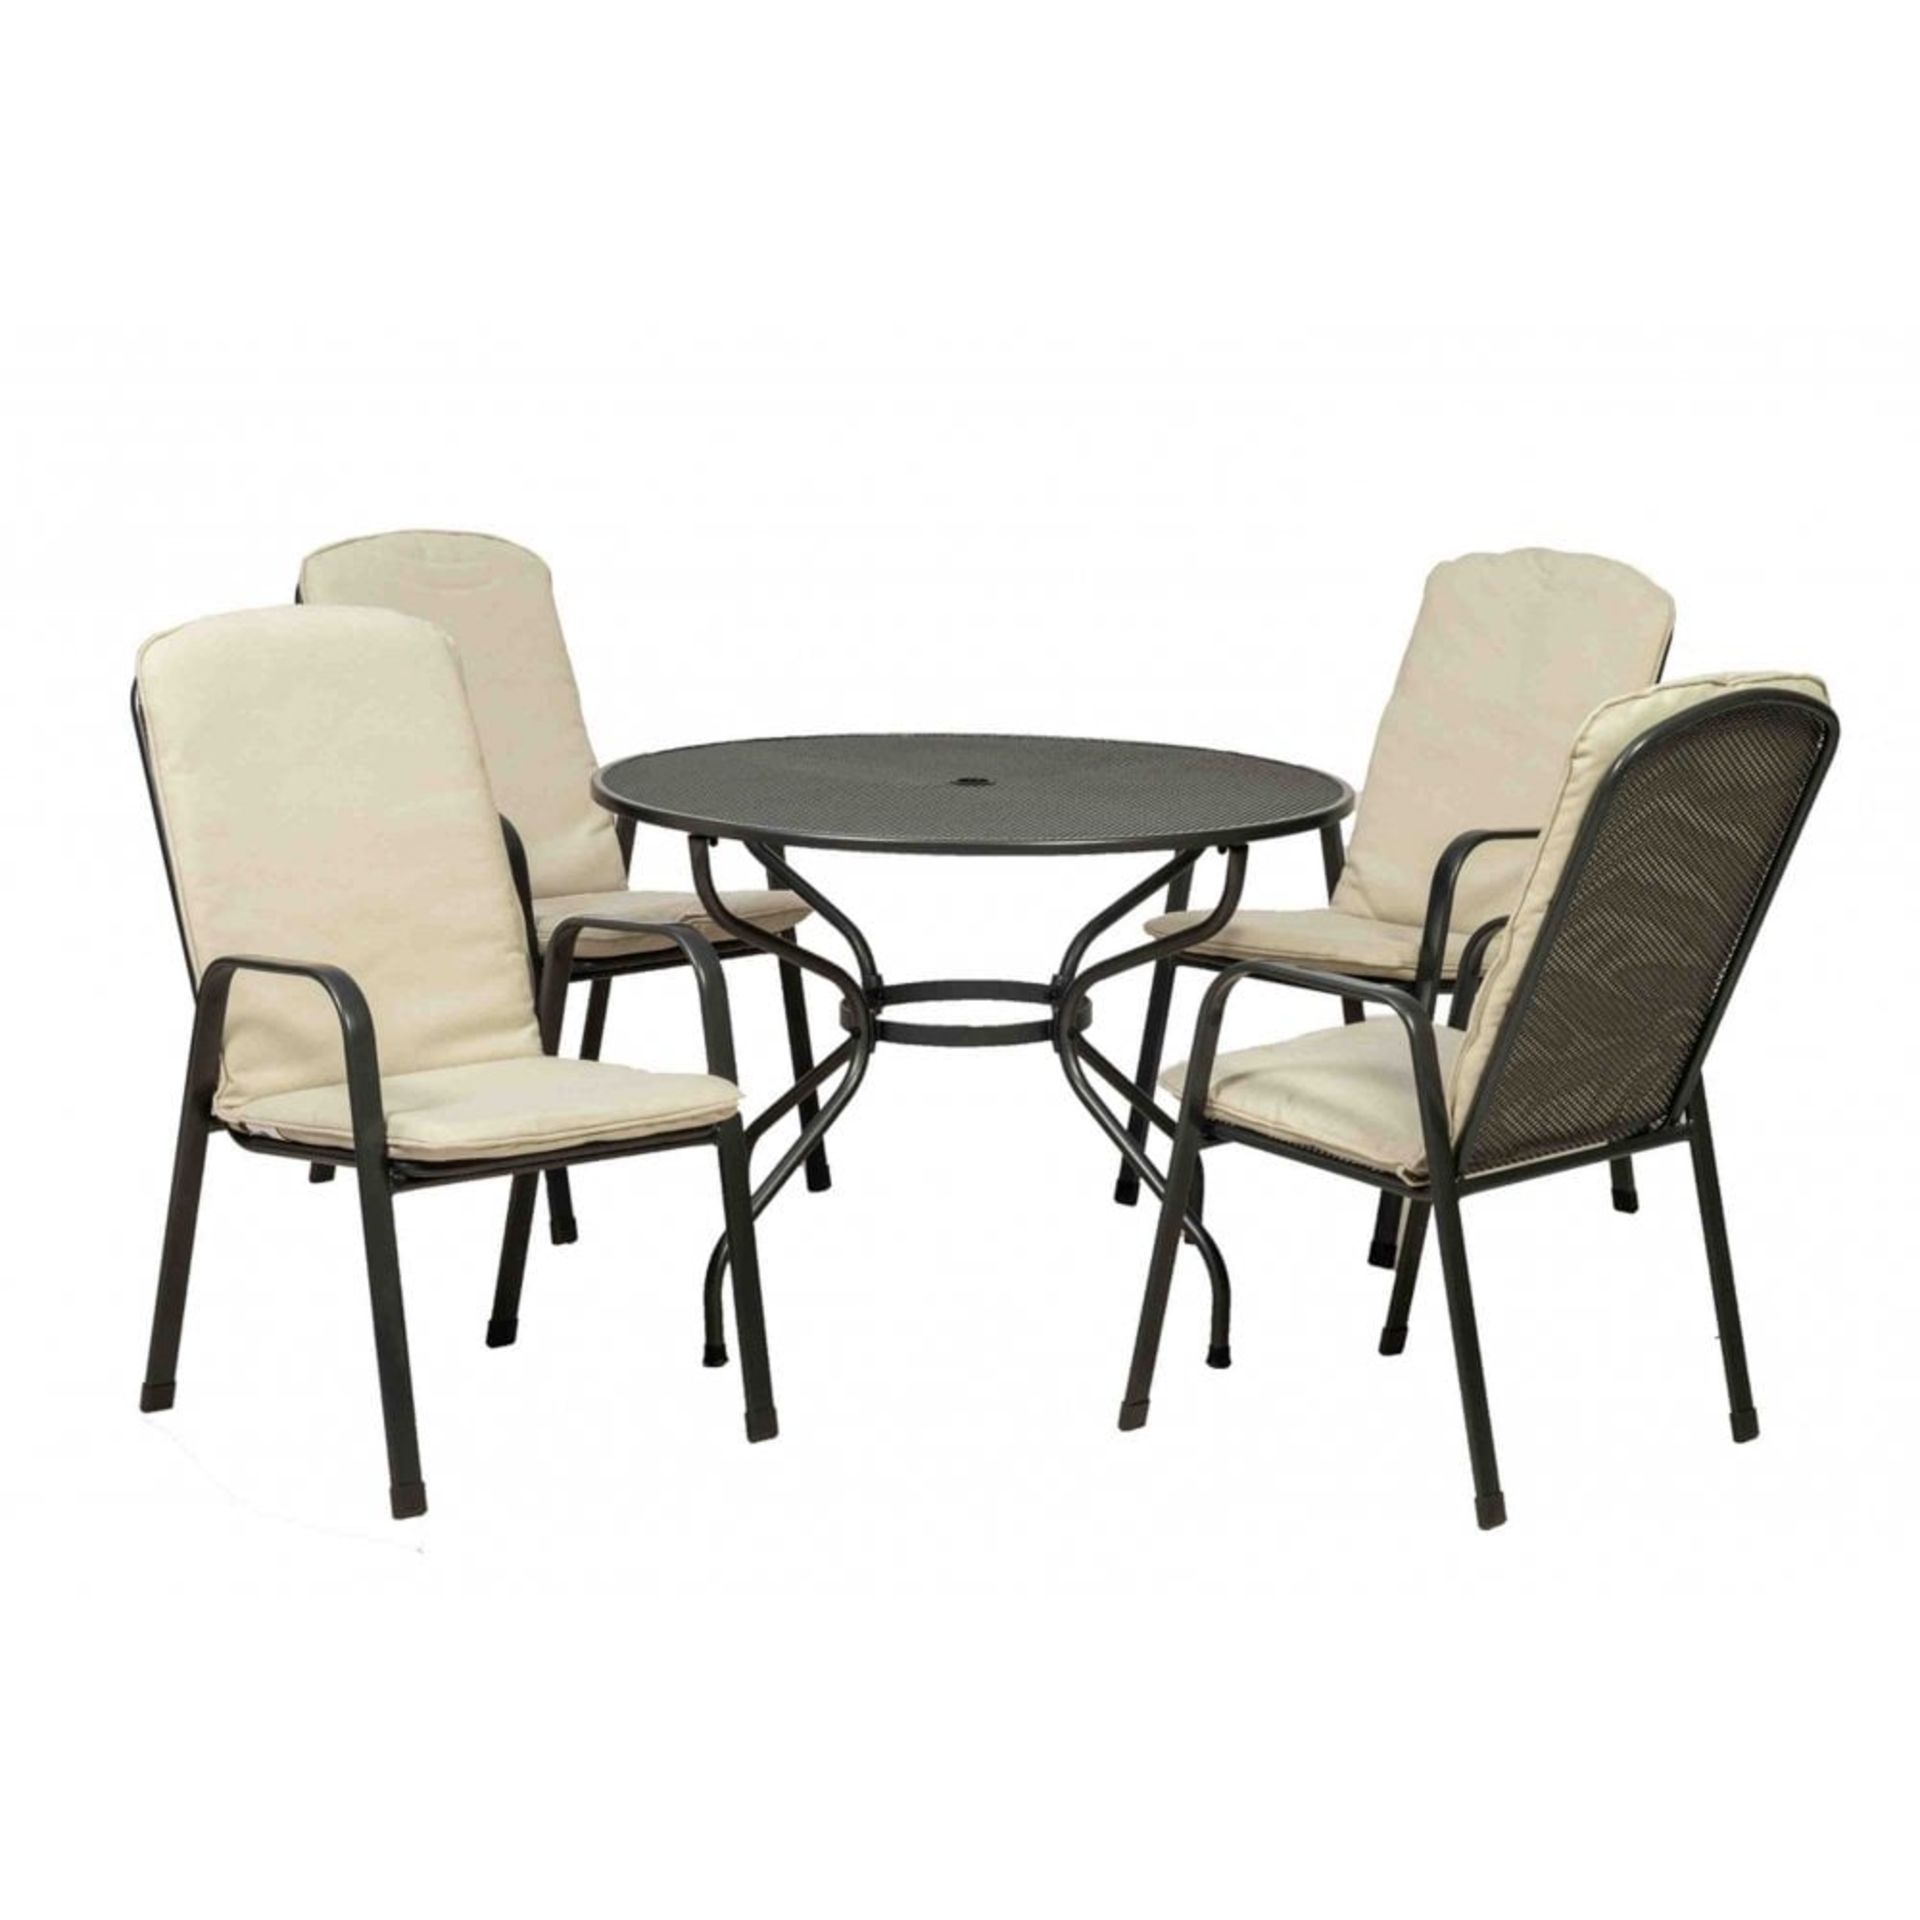 V Brand New Palma 105 Set - Table & Four Chairs - Highly Durable Thermosint Finish - Palma